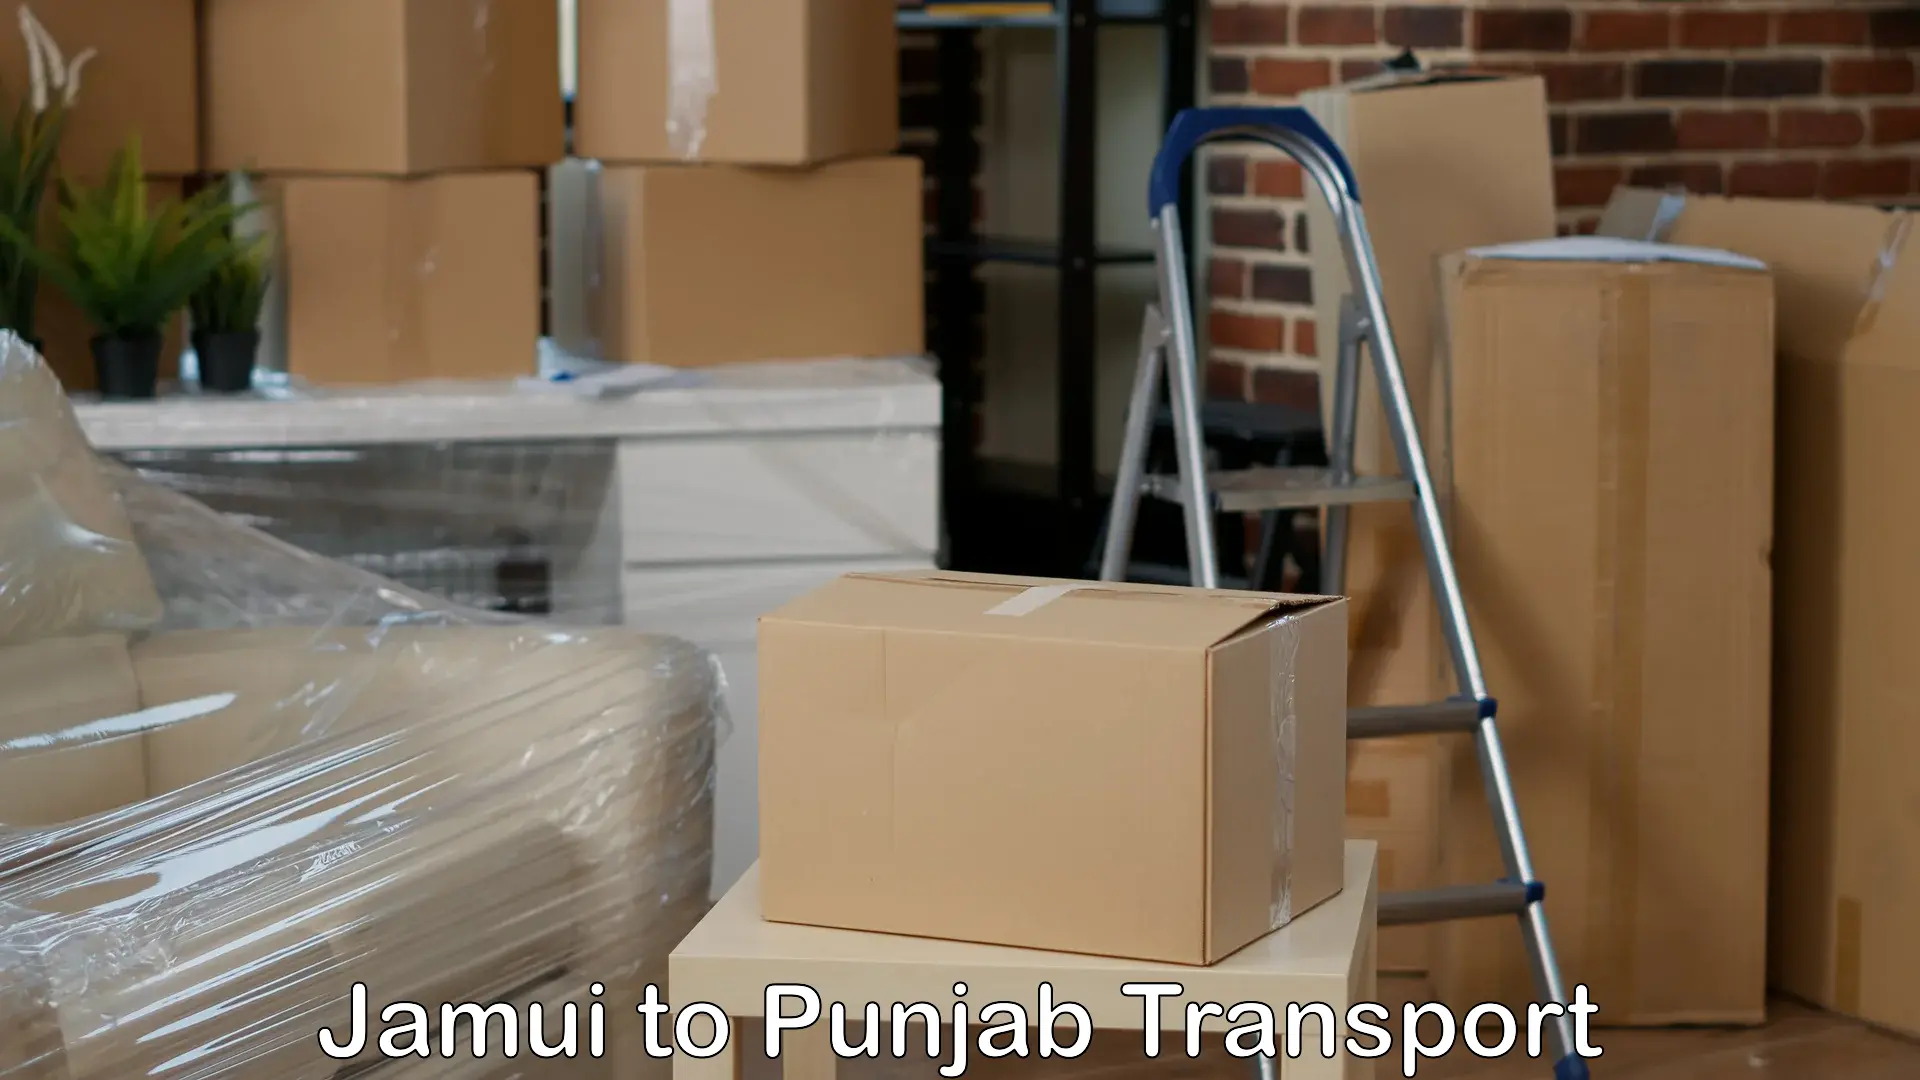 Truck transport companies in India Jamui to Amritsar